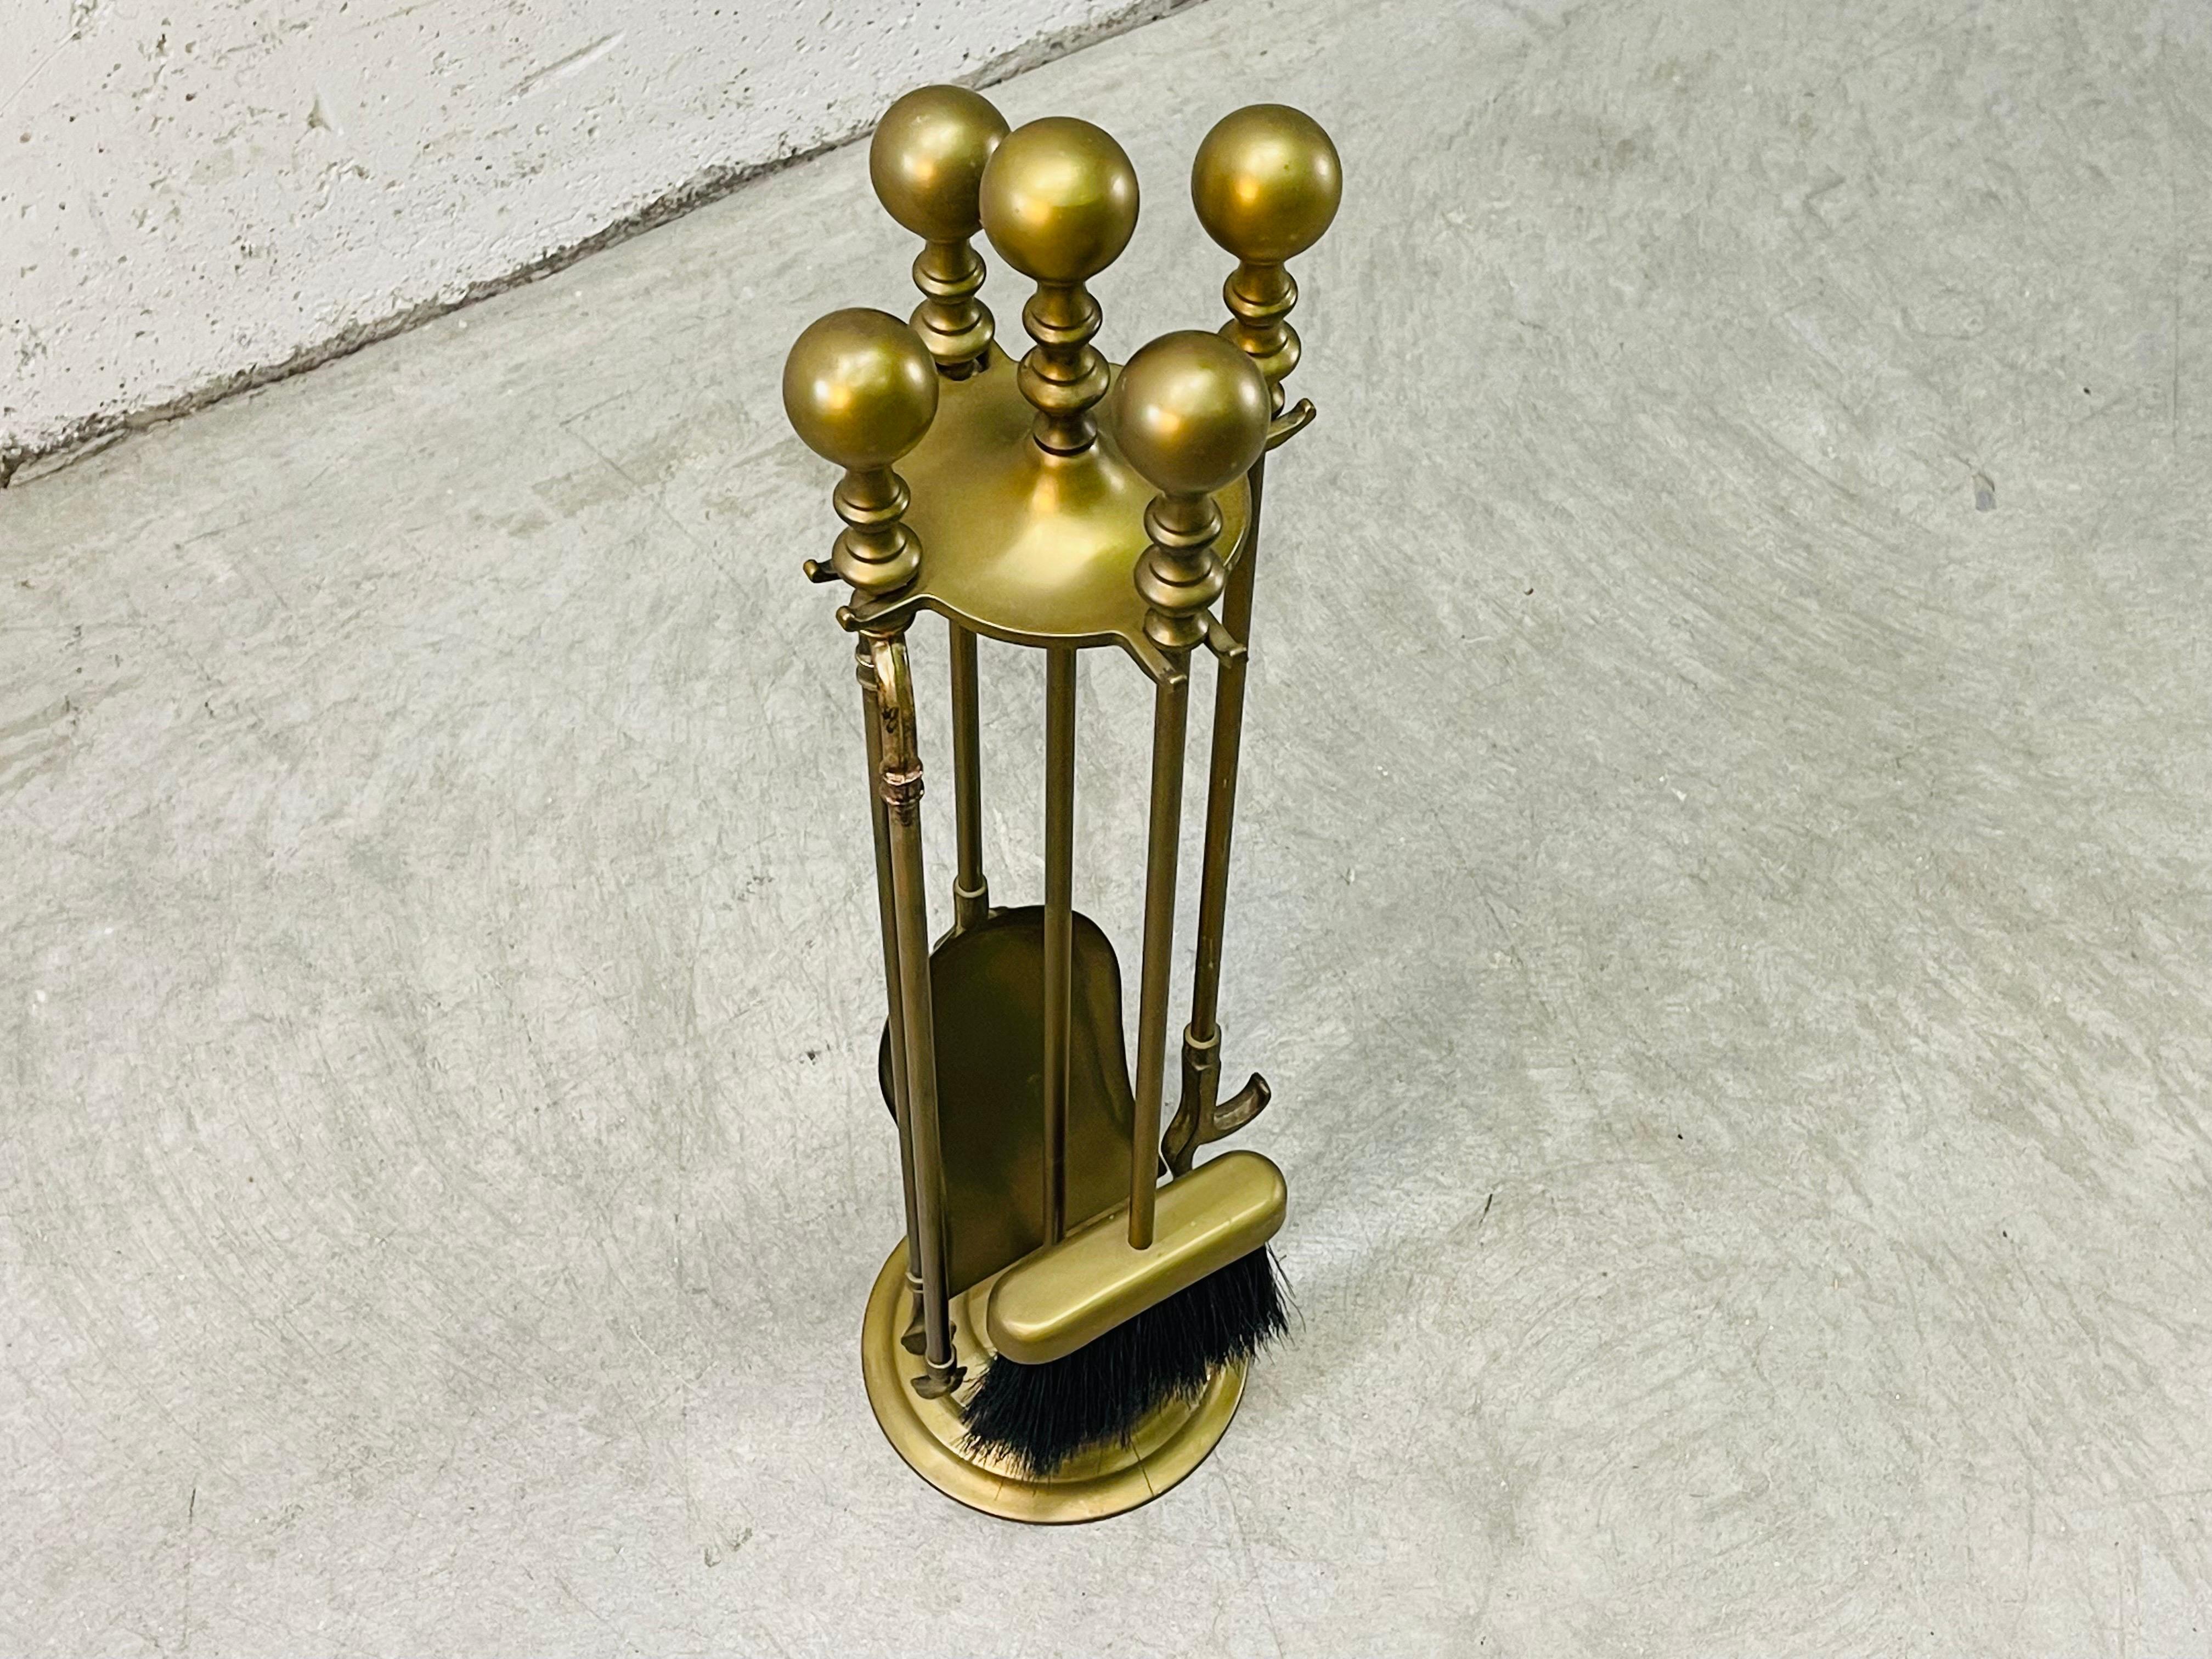 Vintage Italian brass fireplace tool set with round ball handles. The set has four tools and the stand. Marked Italy underneath.